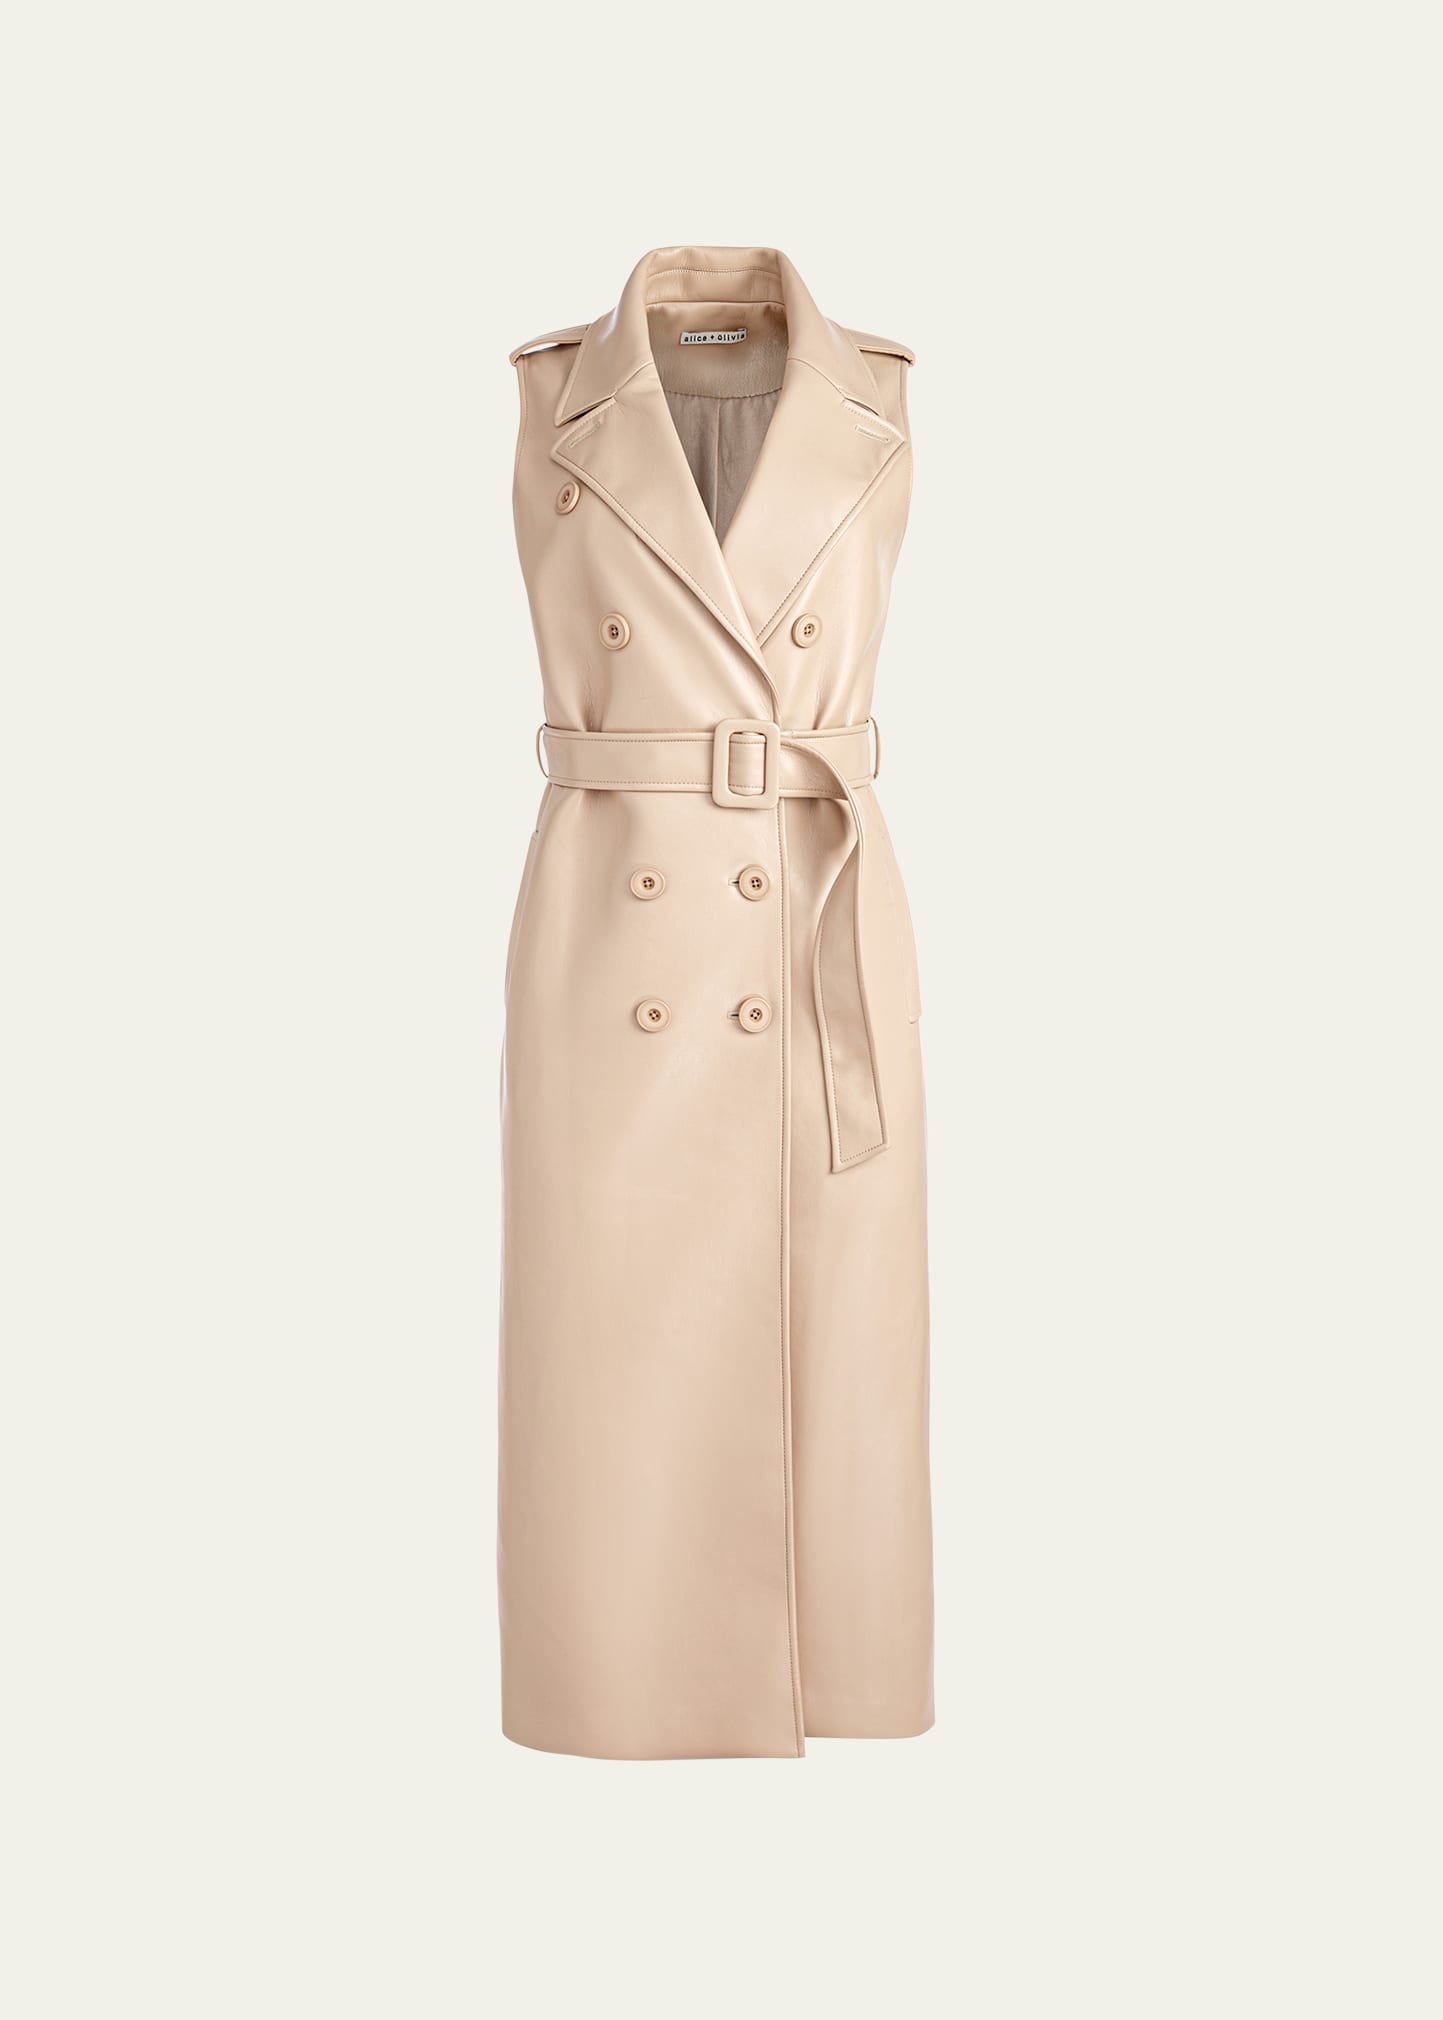 ALICE AND OLIVIA CONAN VEGAN LEATHER BELTED LONG VEST